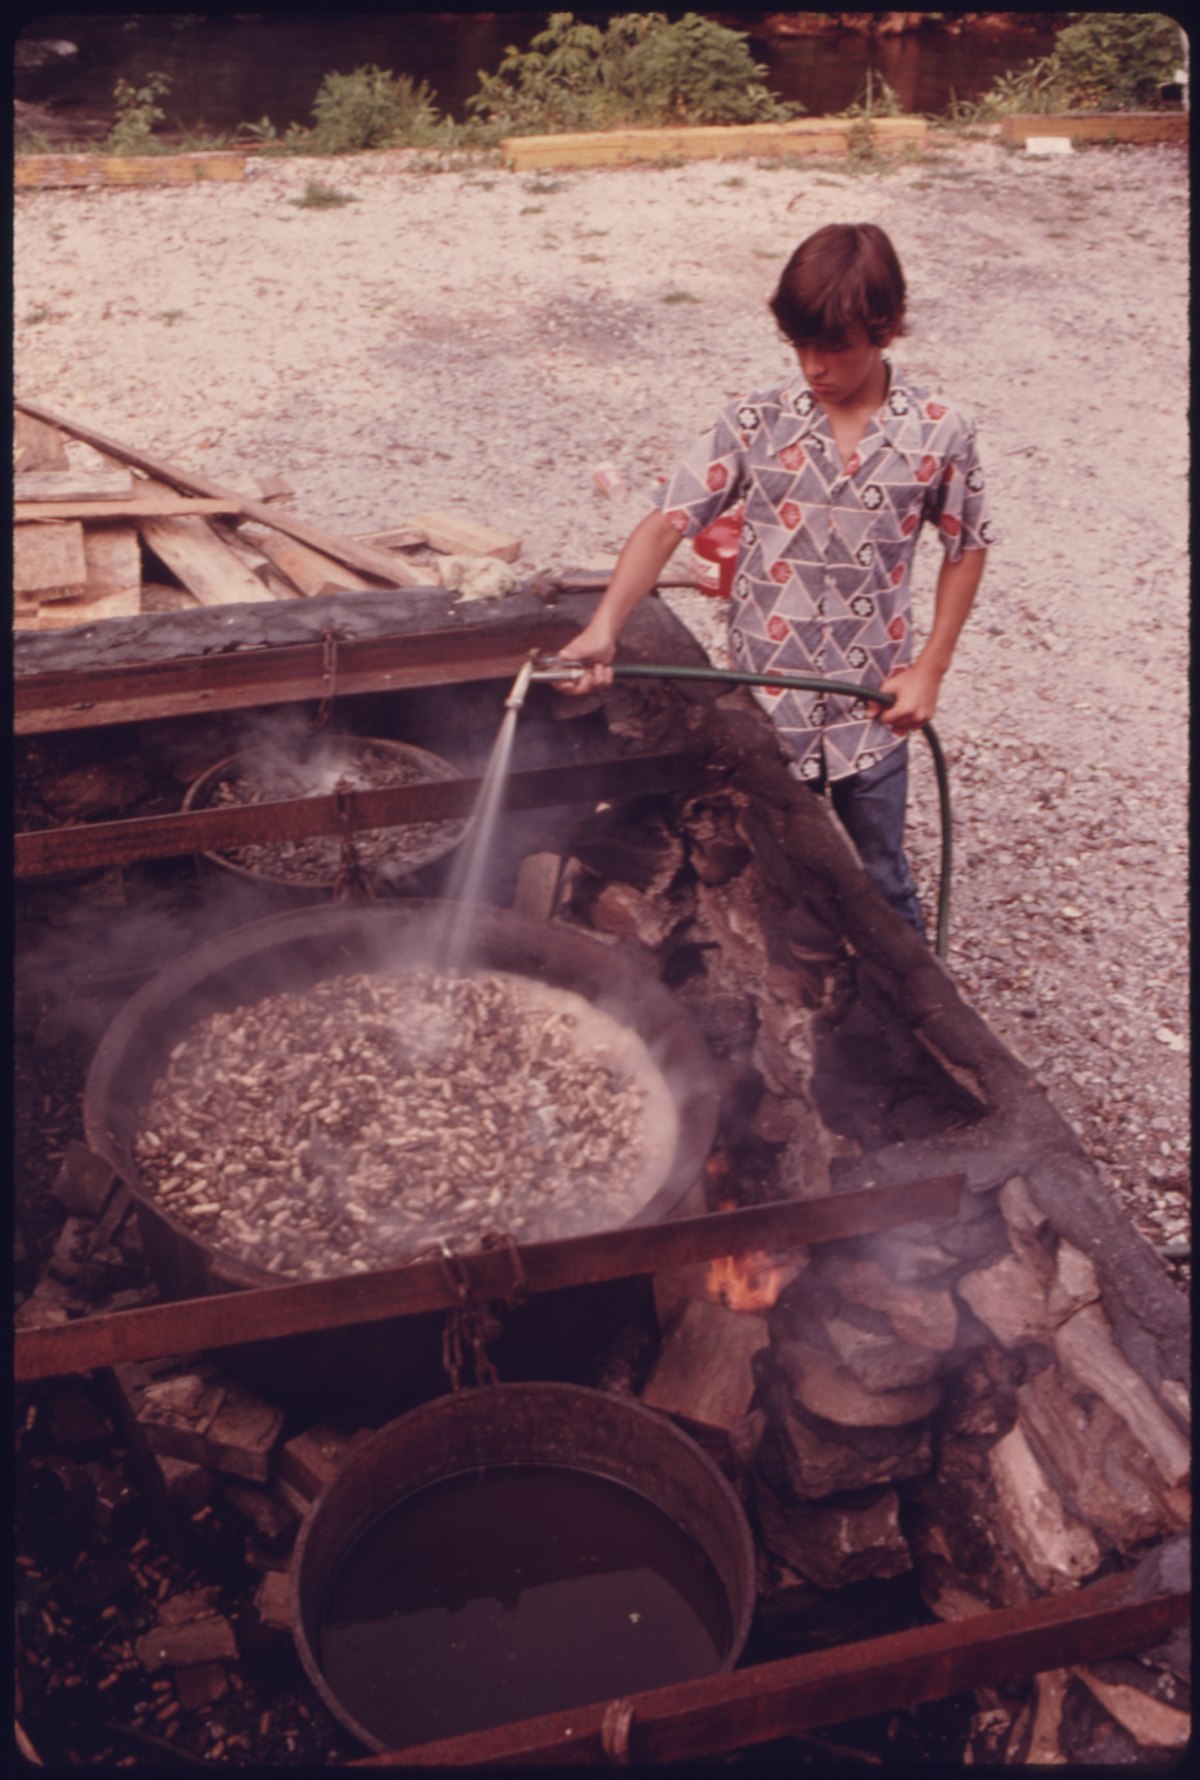 YOUNGSTER SPRAYS WATER ON BOILING PEANUTS IN HELEN, GEORGIA NEAR ROBERTSTOWN. HELEN WAS A TYPICAL SMALL MOUNTAIN... - NARA - 557700.tif